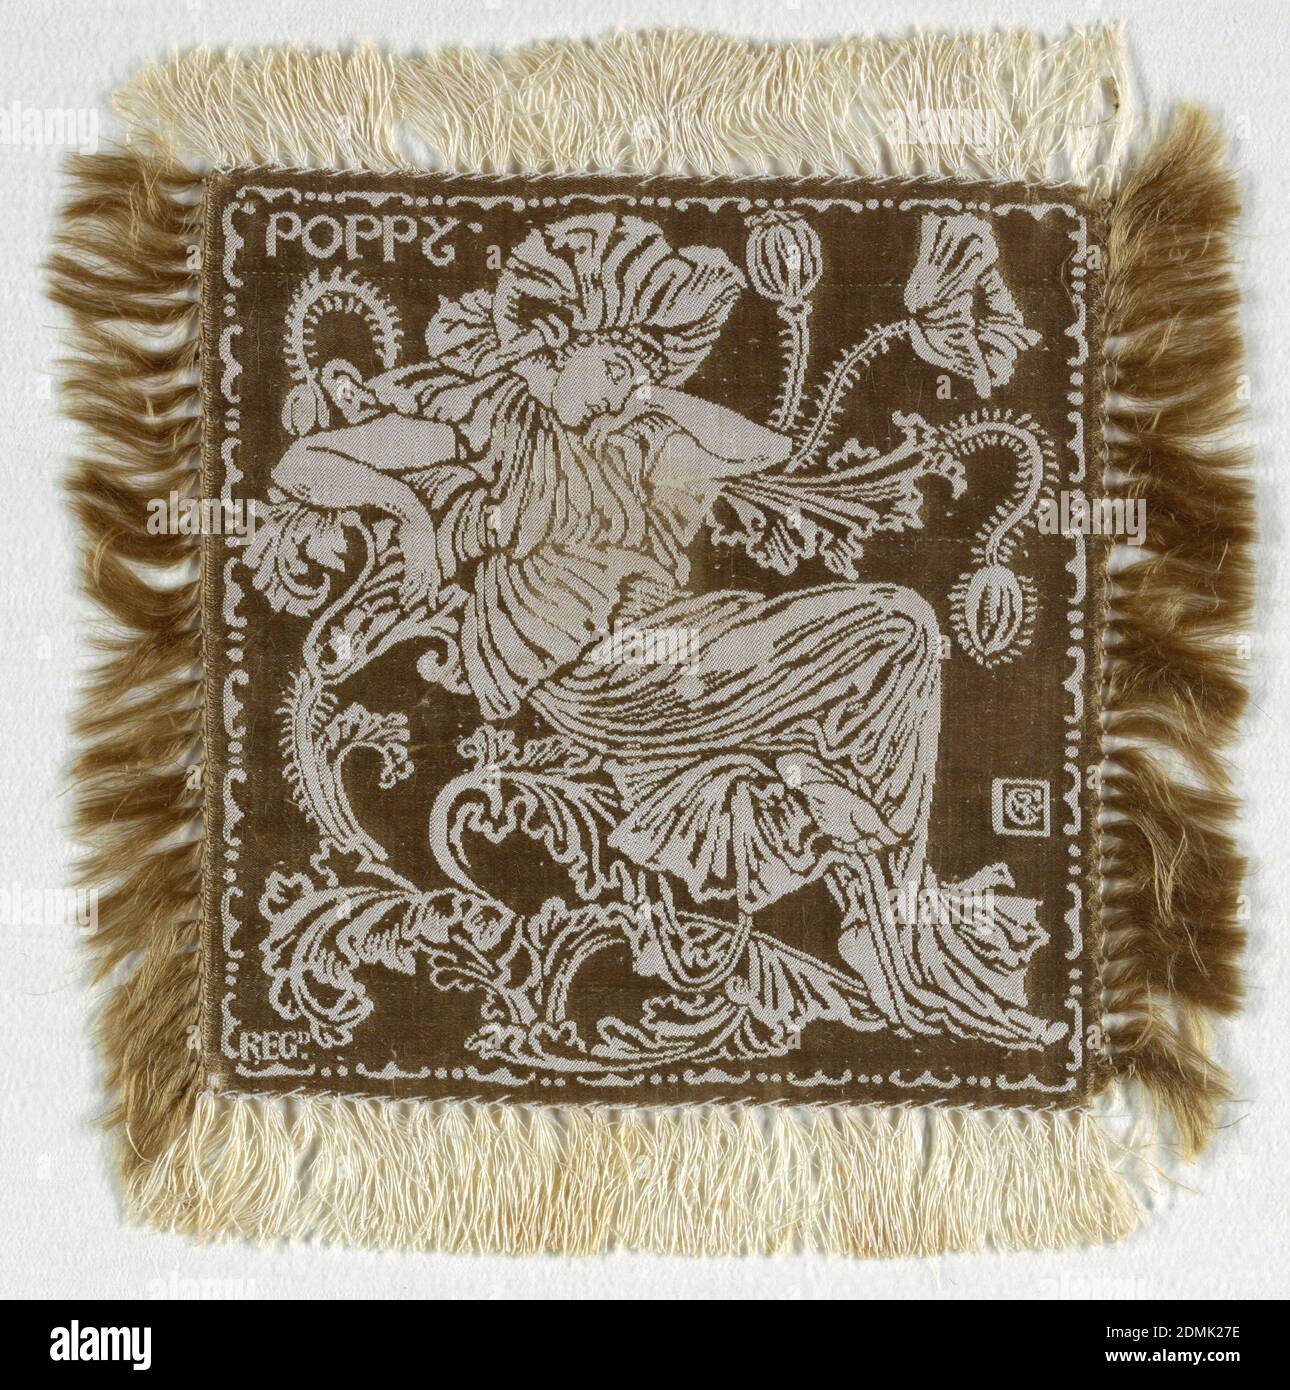 Flora's Retinue: Poppy, Walter Crane, (English, 1845–1915), John Wilson & Sons, (England, 1778–1816), Medium: linen warp, silk weft Technique: 4&1 satin damask, Small square doily, fringed on all sides, with an ivory linen warp and an olive ground. A figure of a woman dressed as a poppy with and sitting on the stem of a large poppy, with the word POPPY in the upper left corner, all appearing in ivory on an olive ground. A set of six, the doilies would have been used on the table as part of a dessert service., Great Britain, ca. 1891, woven textiles, Doily Stock Photo